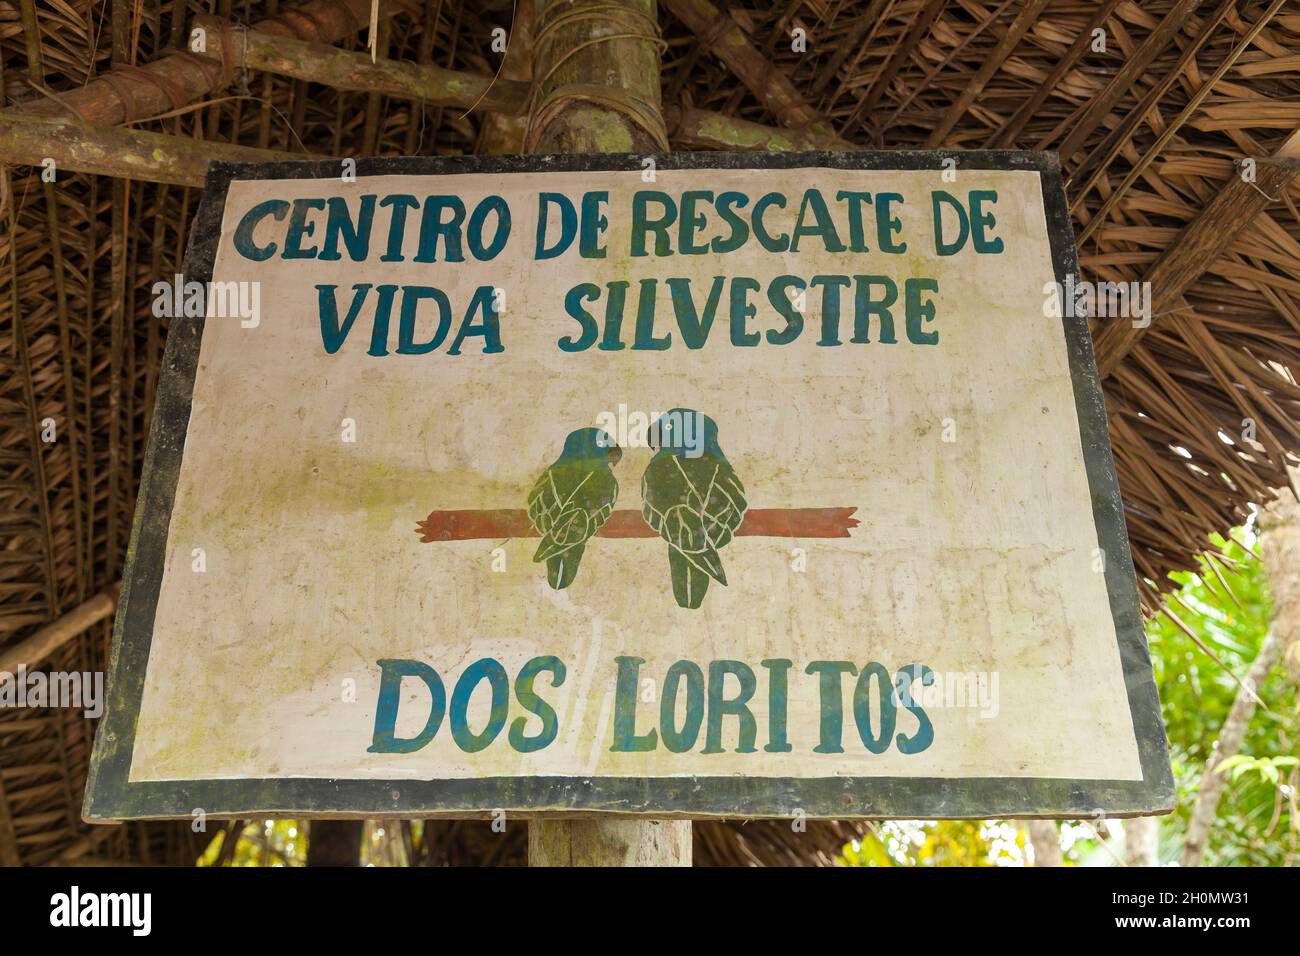 Pilcopata, Peru - April 10, 2014: Old entrance sign to the Dos Loritos wildlife recovery and rescue center, near the small town of Pilcopata Stock Photo